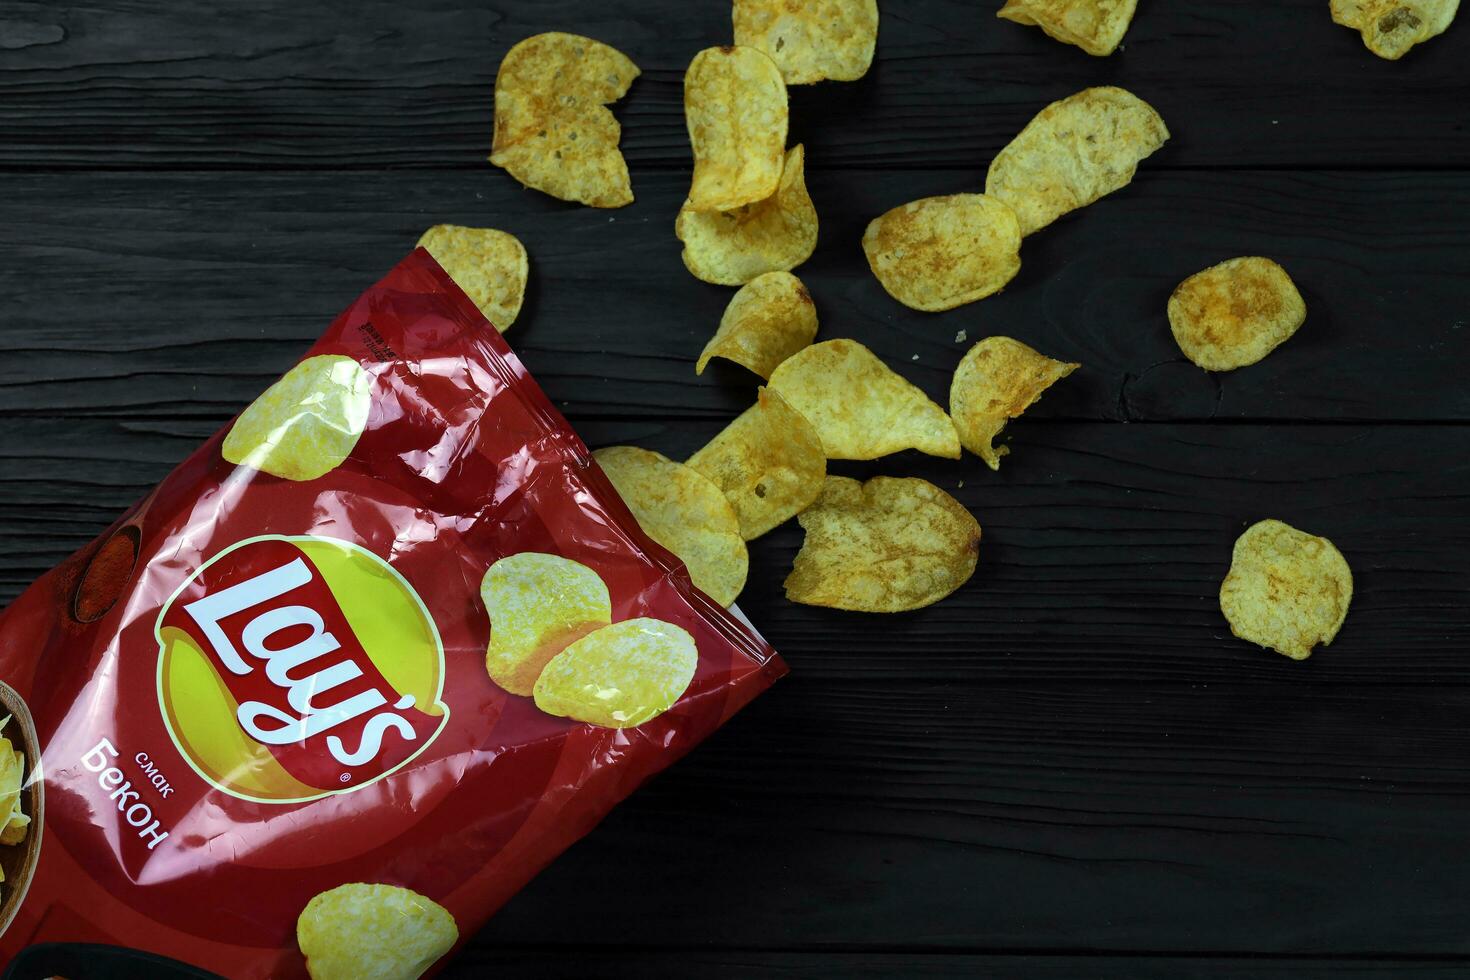 KHARKOV, UKRAINE - JANUARY 3, 2021 Lays potato chips with bacon flavour and original lays logo in middle of package. Worldwide famous brand of potato chips photo